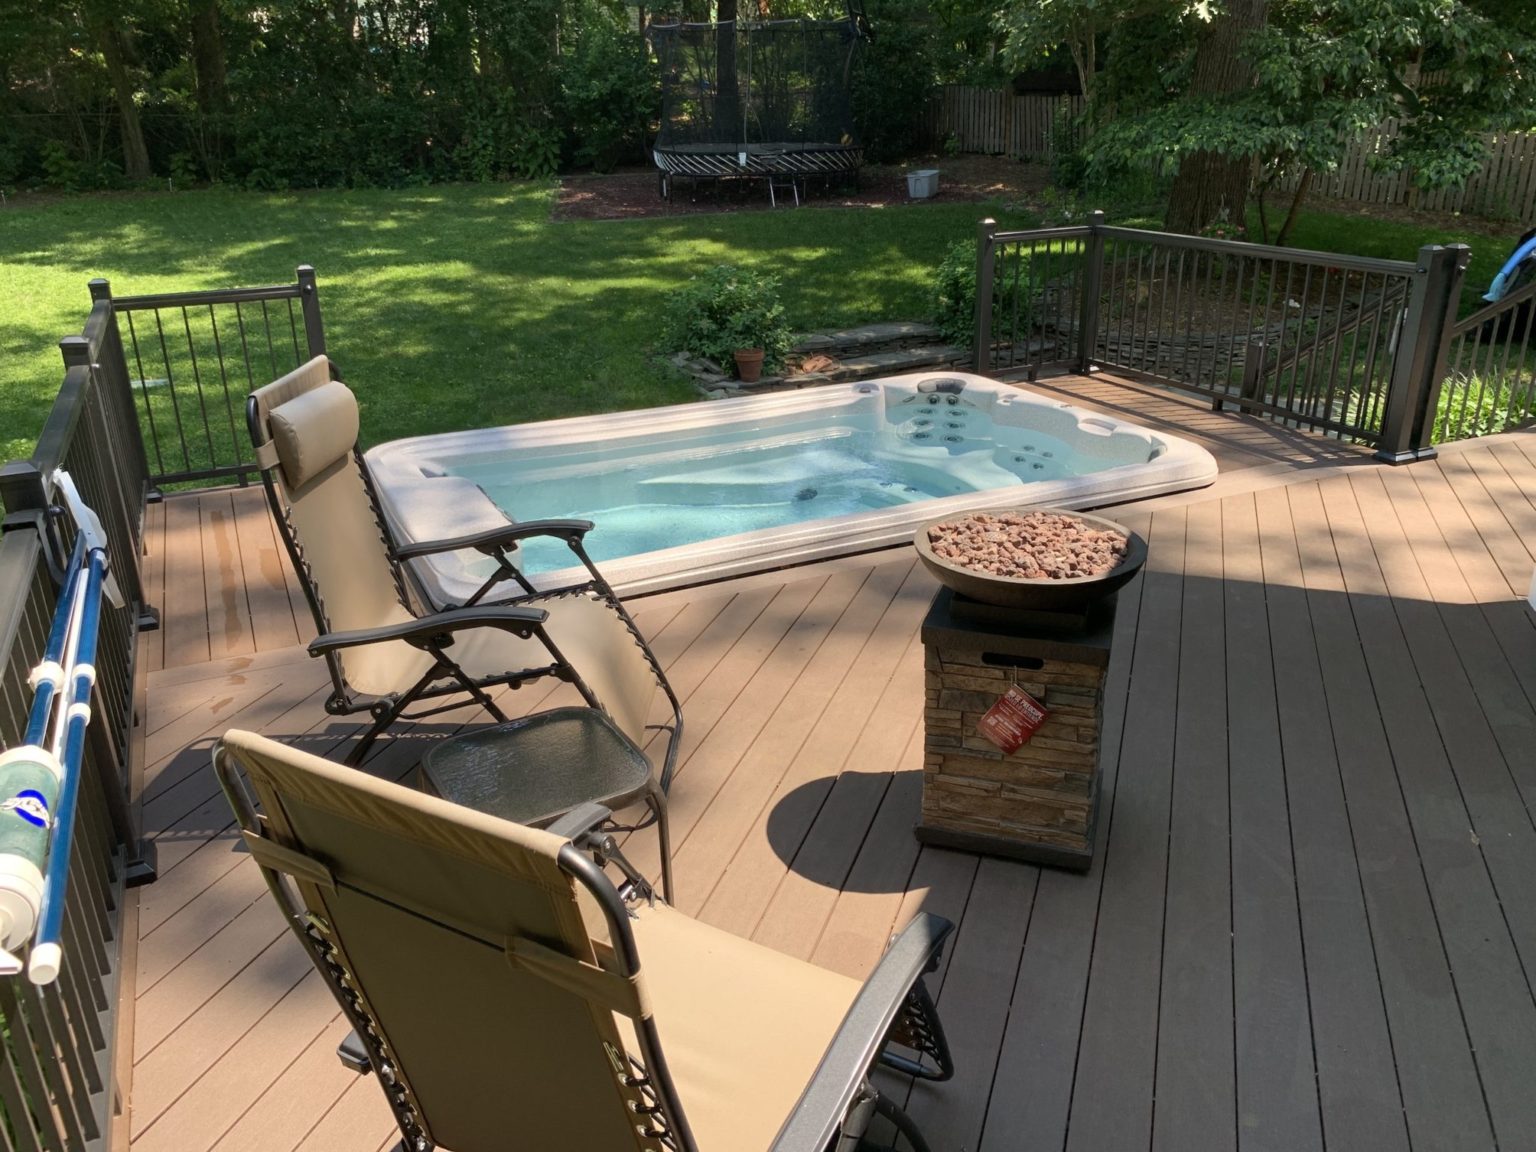 How to Safely Use a Fire Pit On Your Wood or Composite Deck - Fence